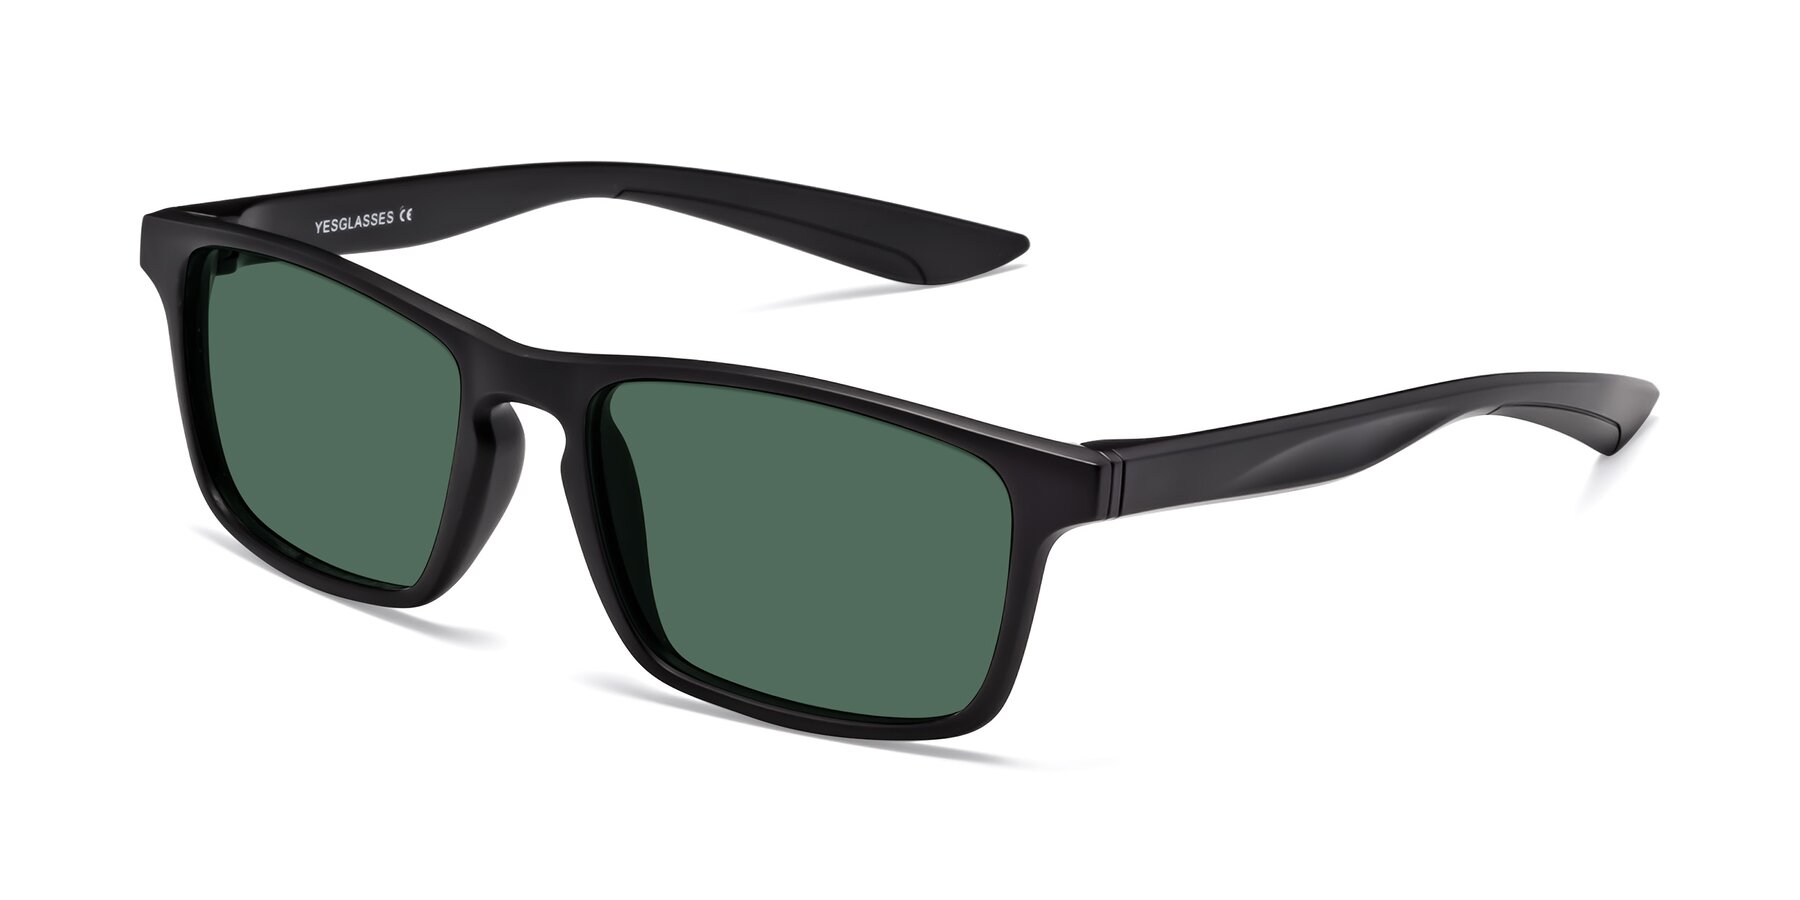 Angle of Passion in Matte Black with Green Polarized Lenses